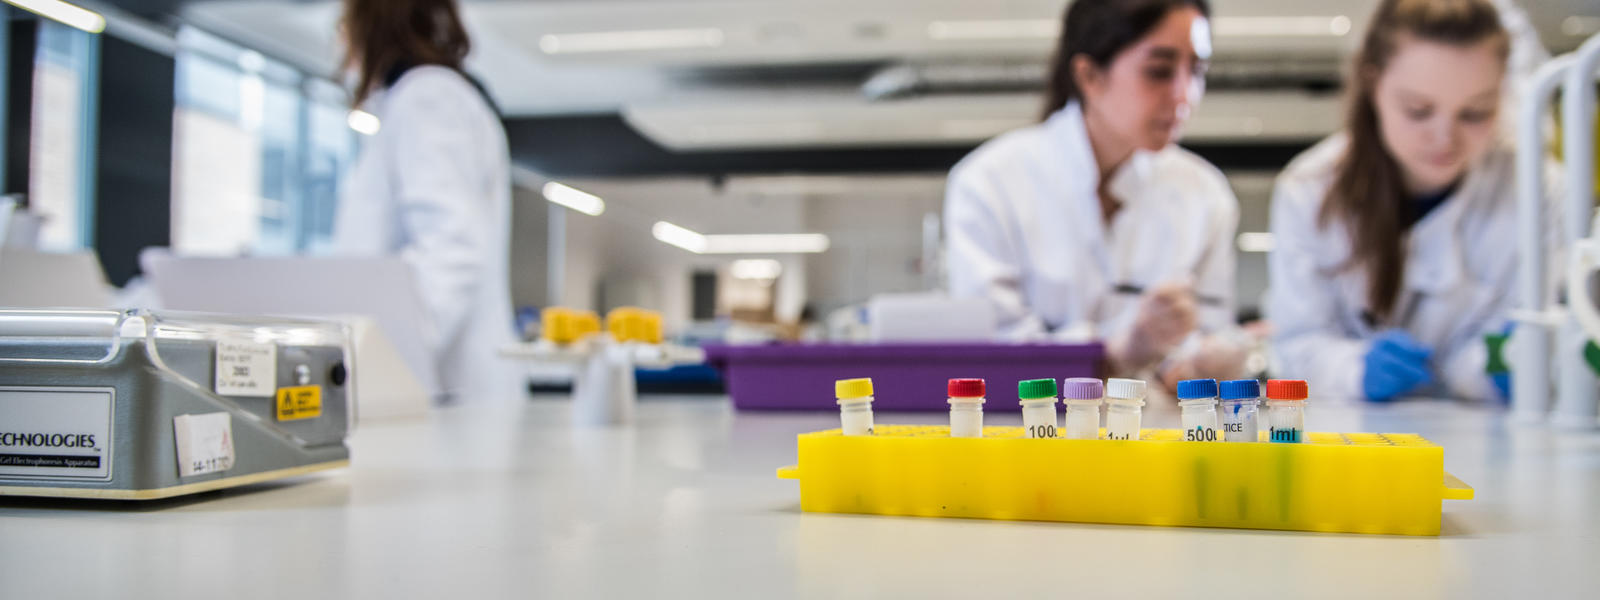 A close up of some liquid vials on the laboratory work-surface, with students working in the background.